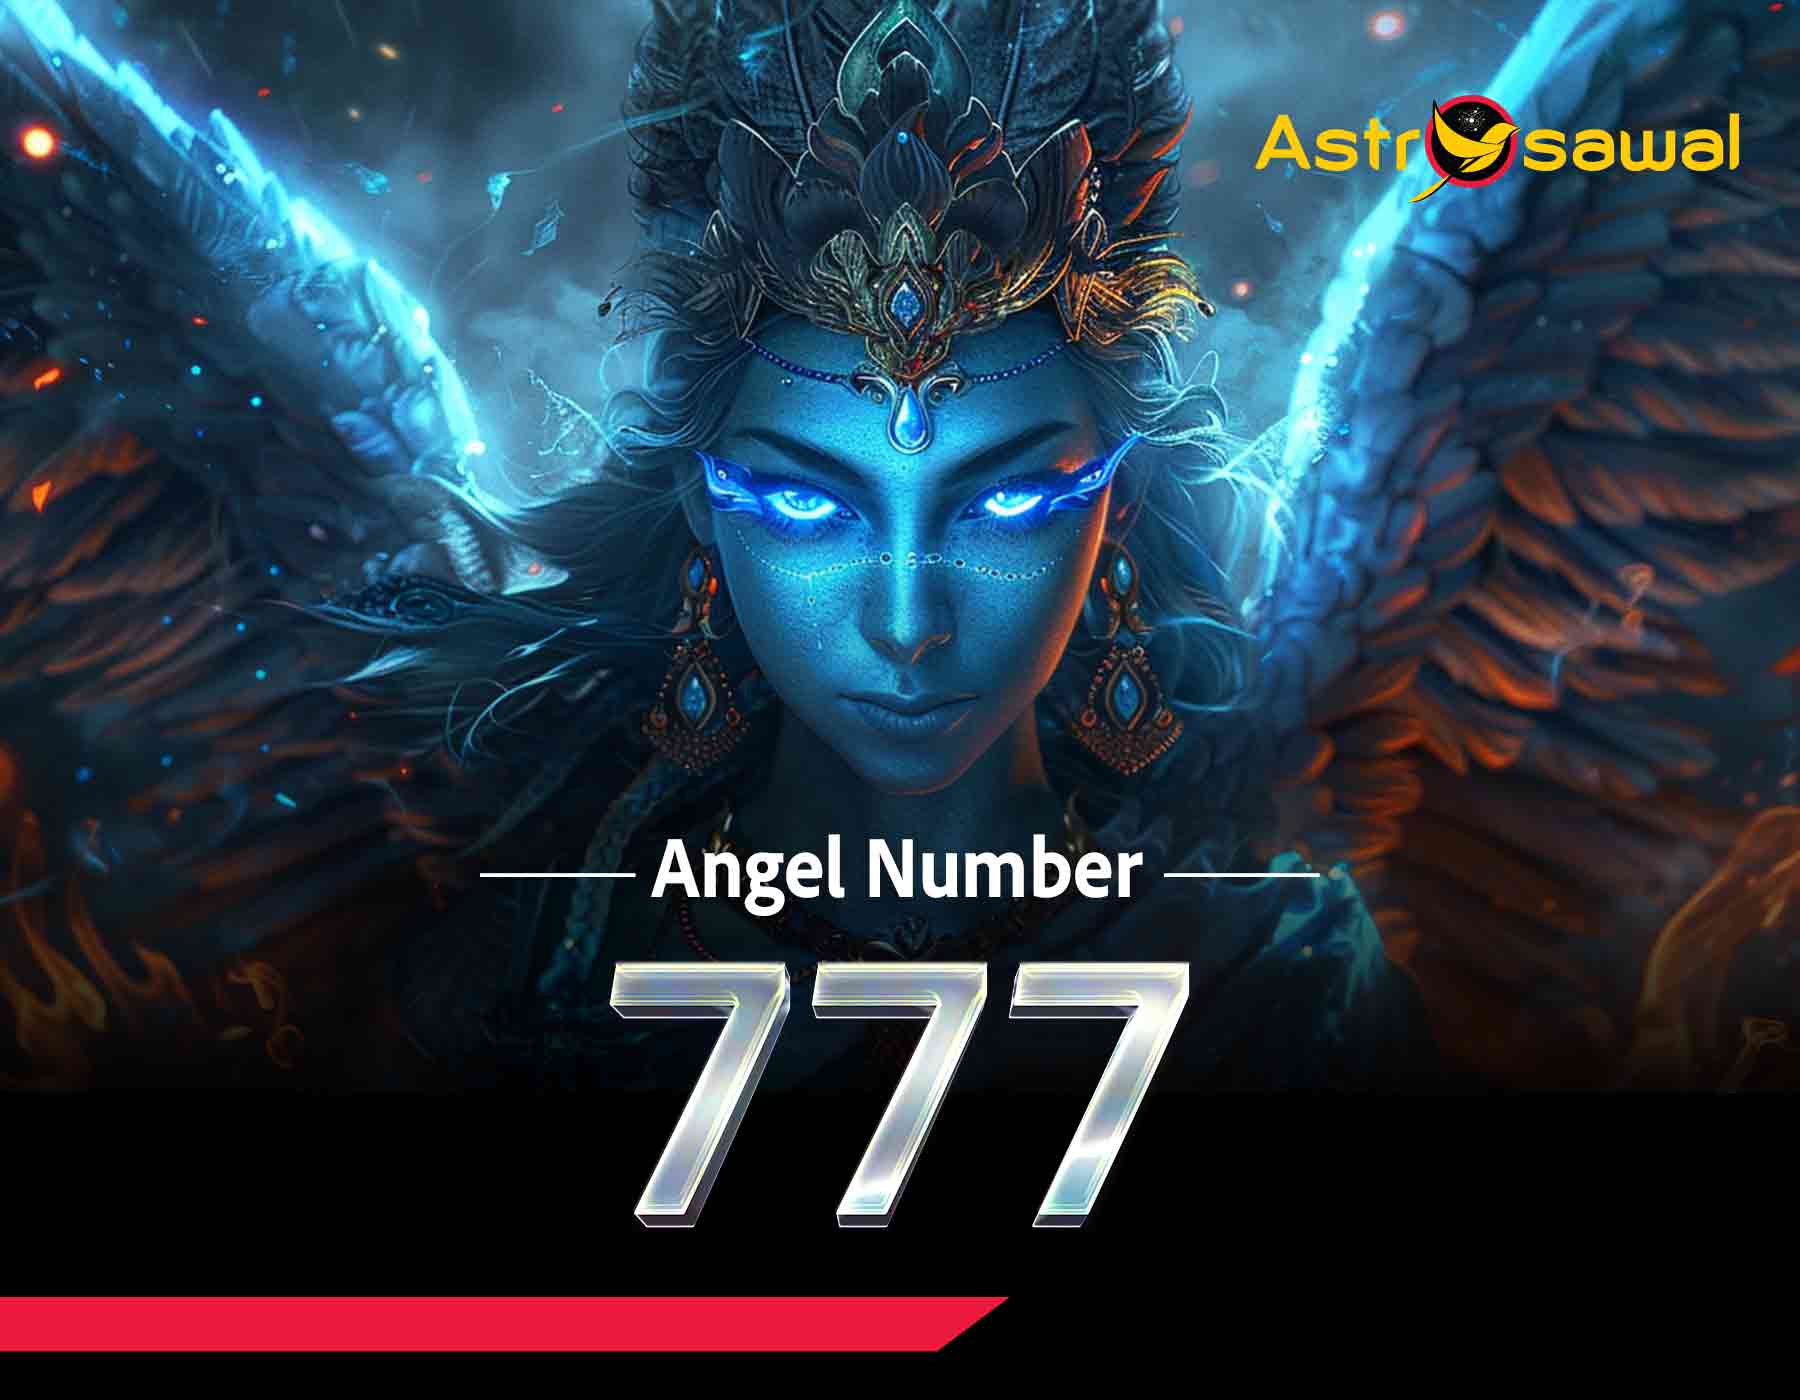 Decoding the Spiritual Significance of the 777 Angel Number